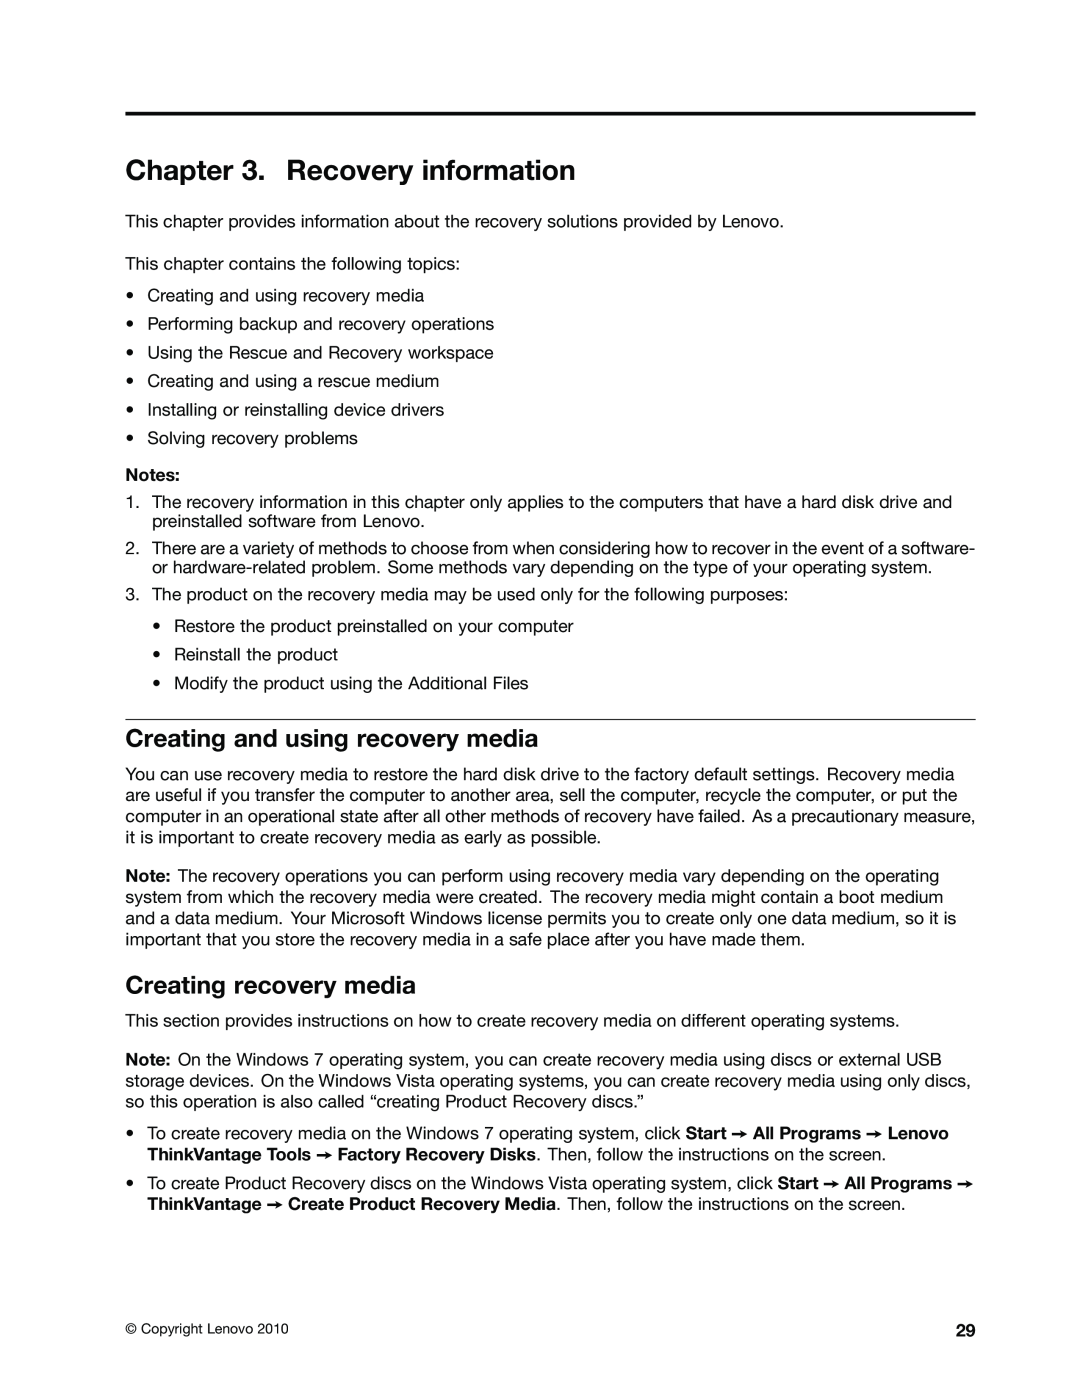 Lenovo 3557, 3034, 6667, 5092, 5226, 4394 Recovery information, Creating and using recovery media, Creating recovery media 